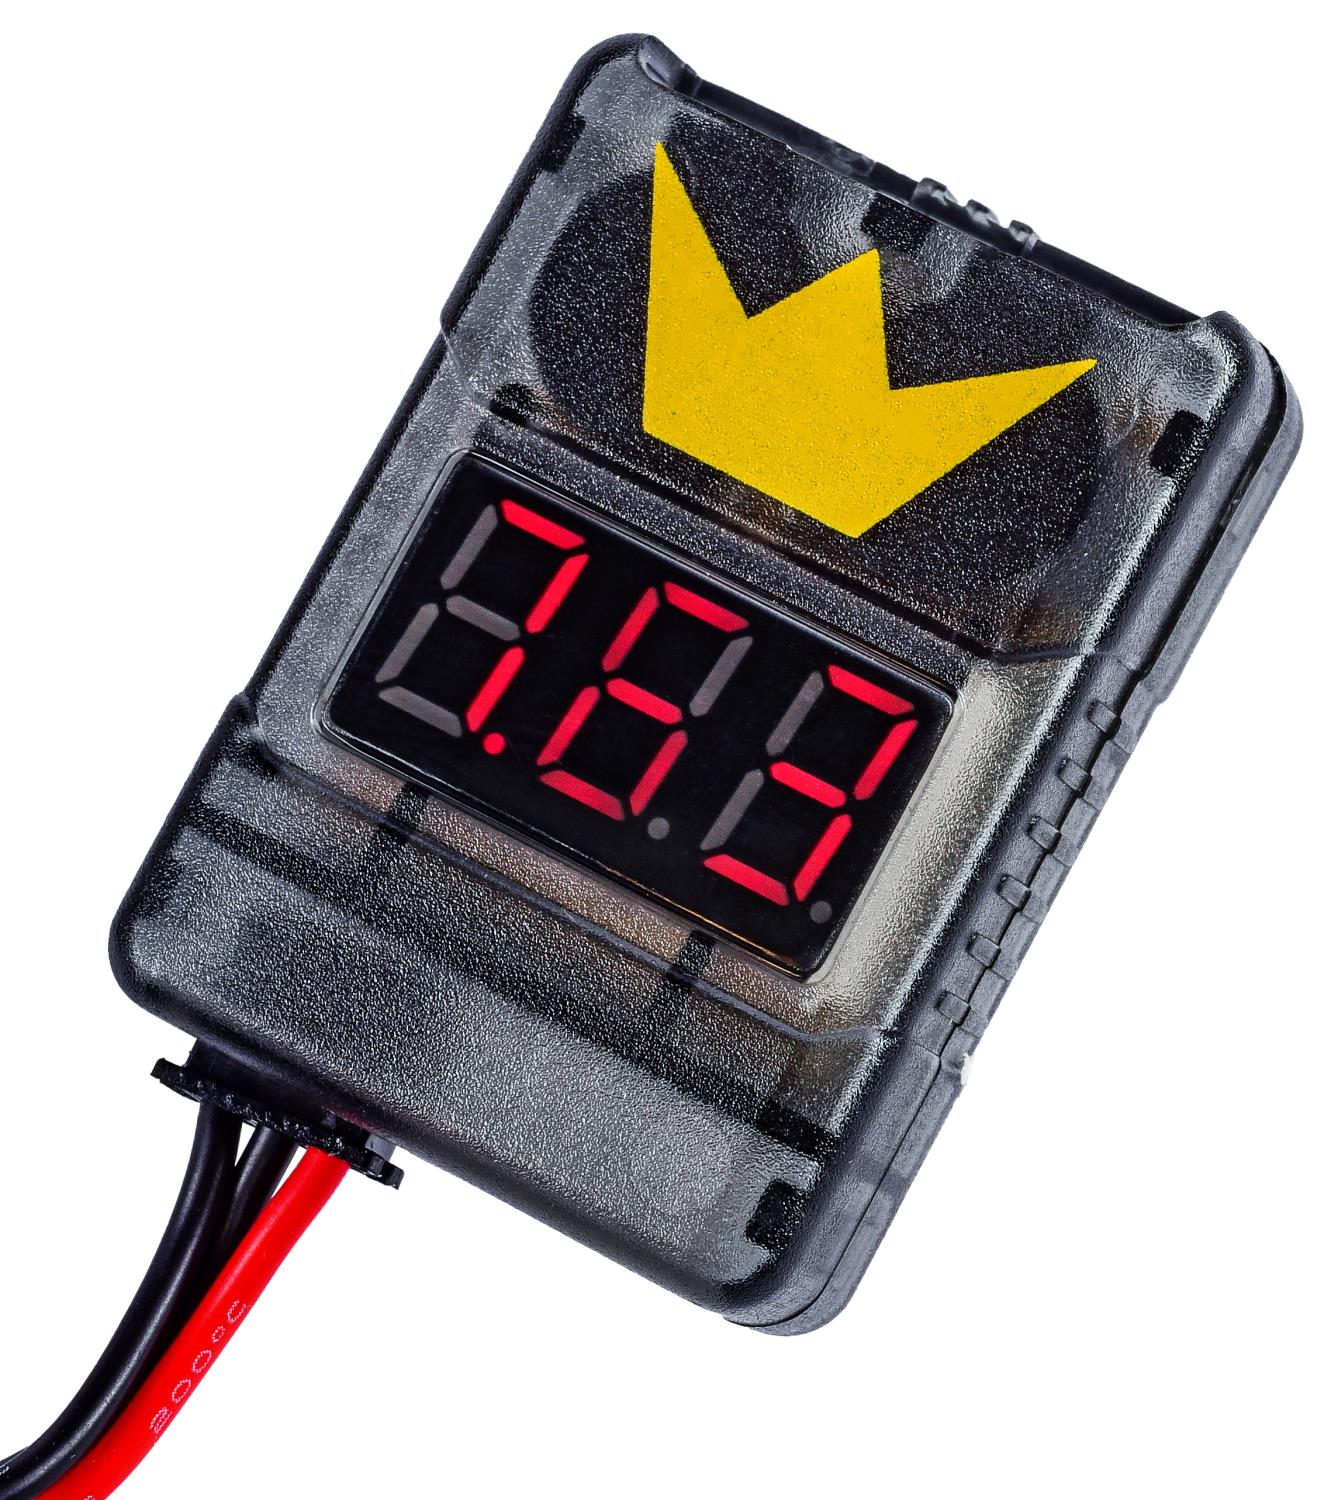 Tester & Discharge Tool [2S-8S LiPo Battery]